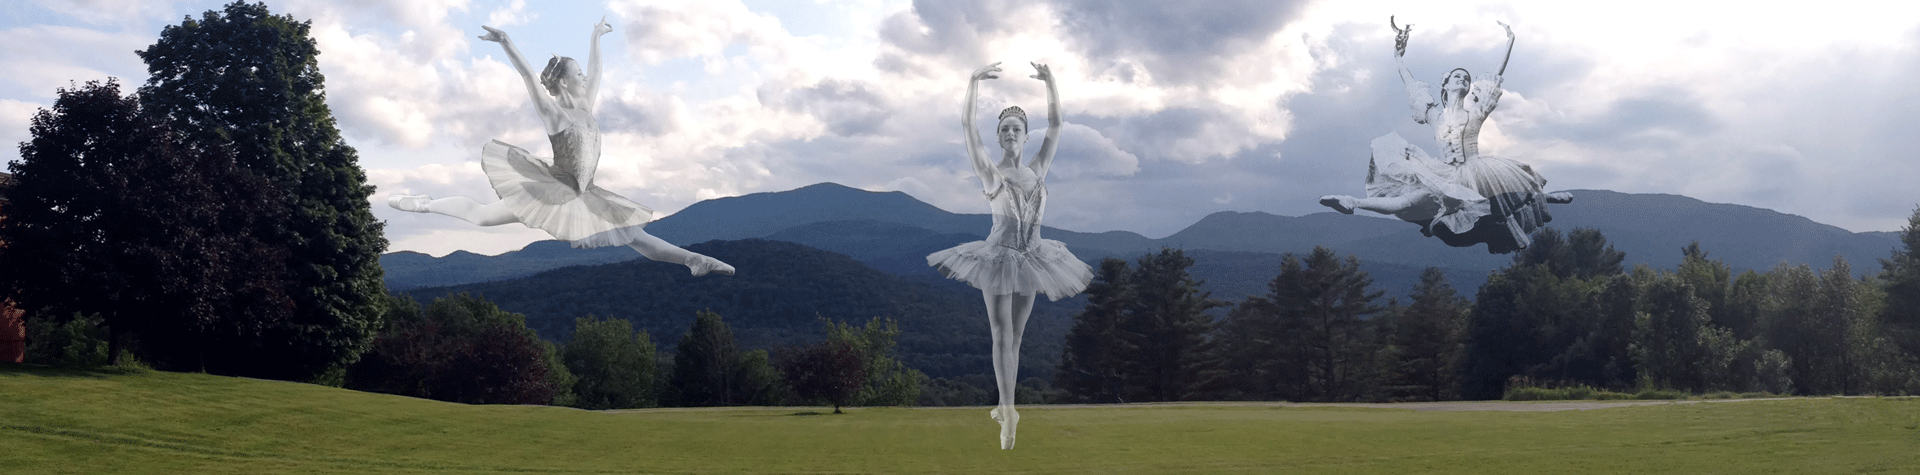 © Burklyn Ballet Theatre | A Vermont Performing Experience